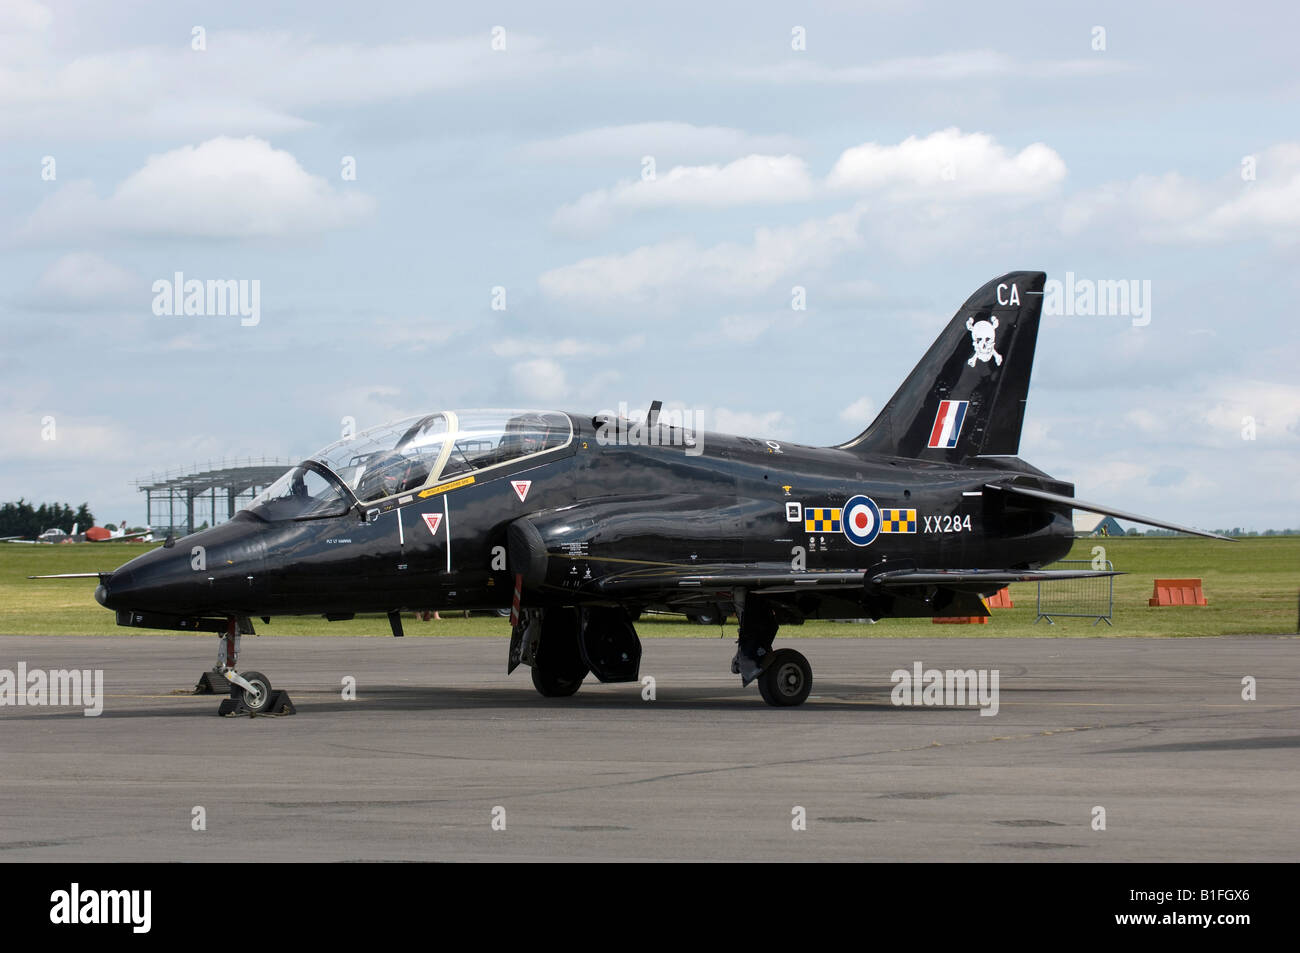 A Black British BAC Hawk fighter / training aircraft in Royal Air Force livery Stock Photo